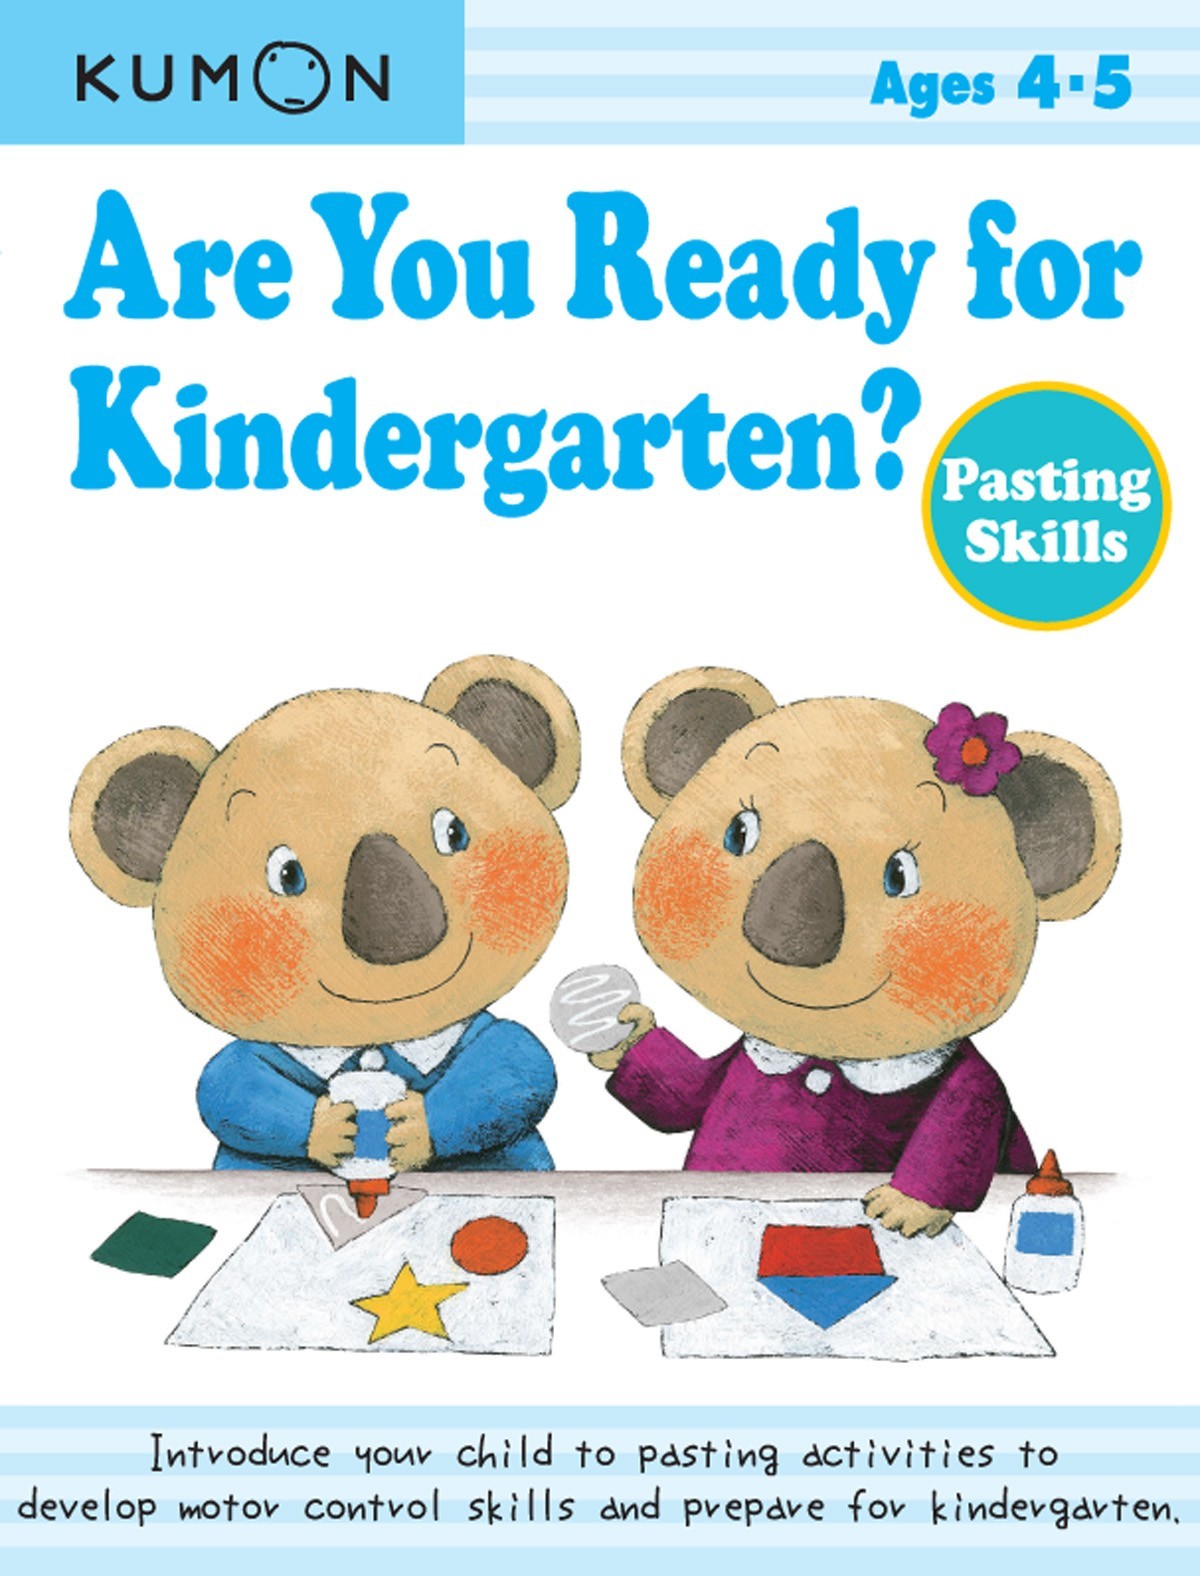 Kumon Are You Ready for Kindergarten? Pasting Skills